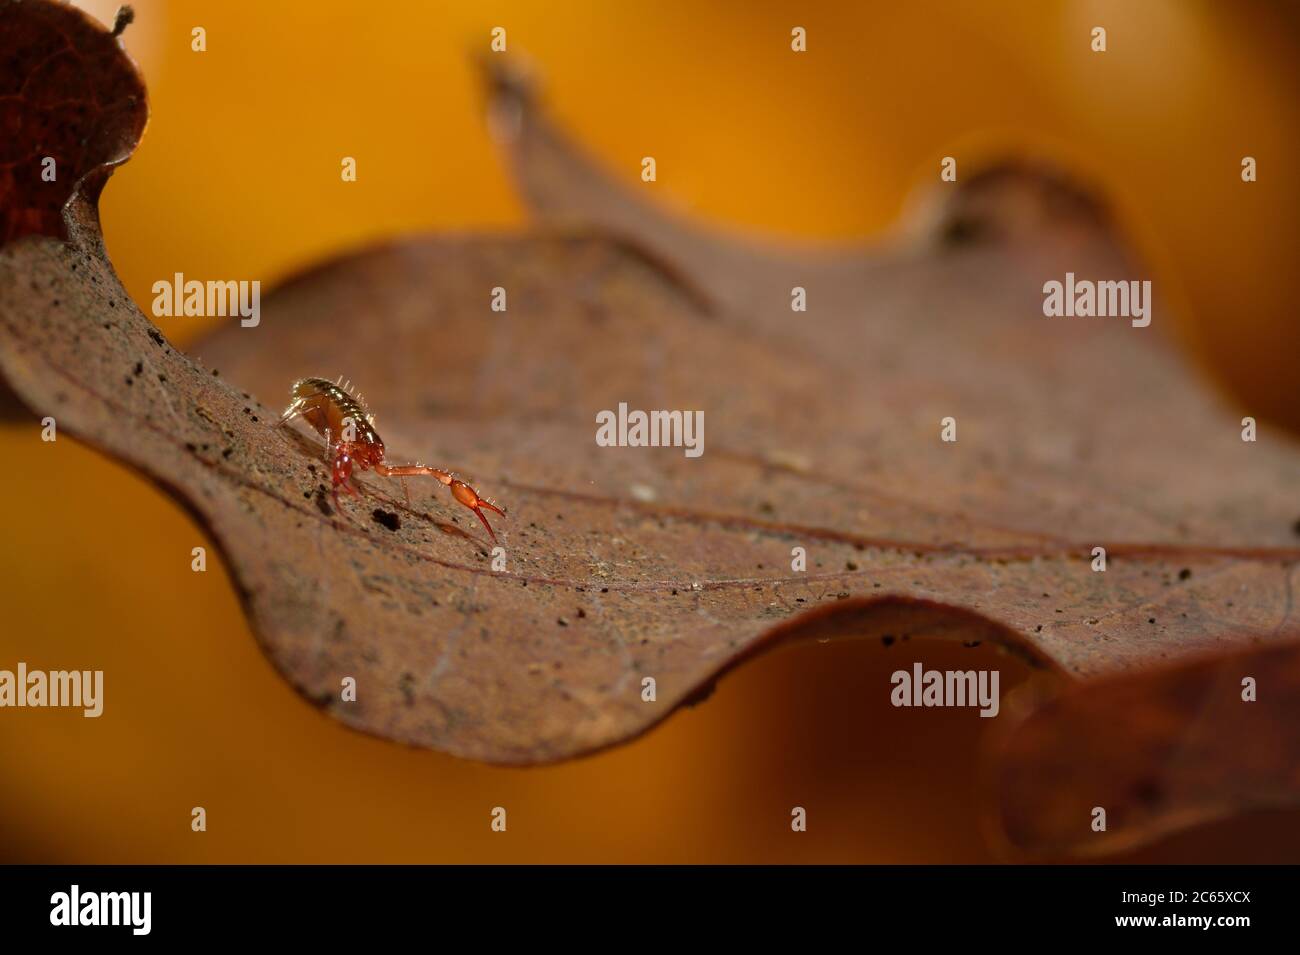 Pseudoscorpion (Chelifer cancroides) on fallen oak tree leaf, also known as a false scorpion or book scorpion, in leaf litter, Westensee, Kiel, Germany Stock Photo